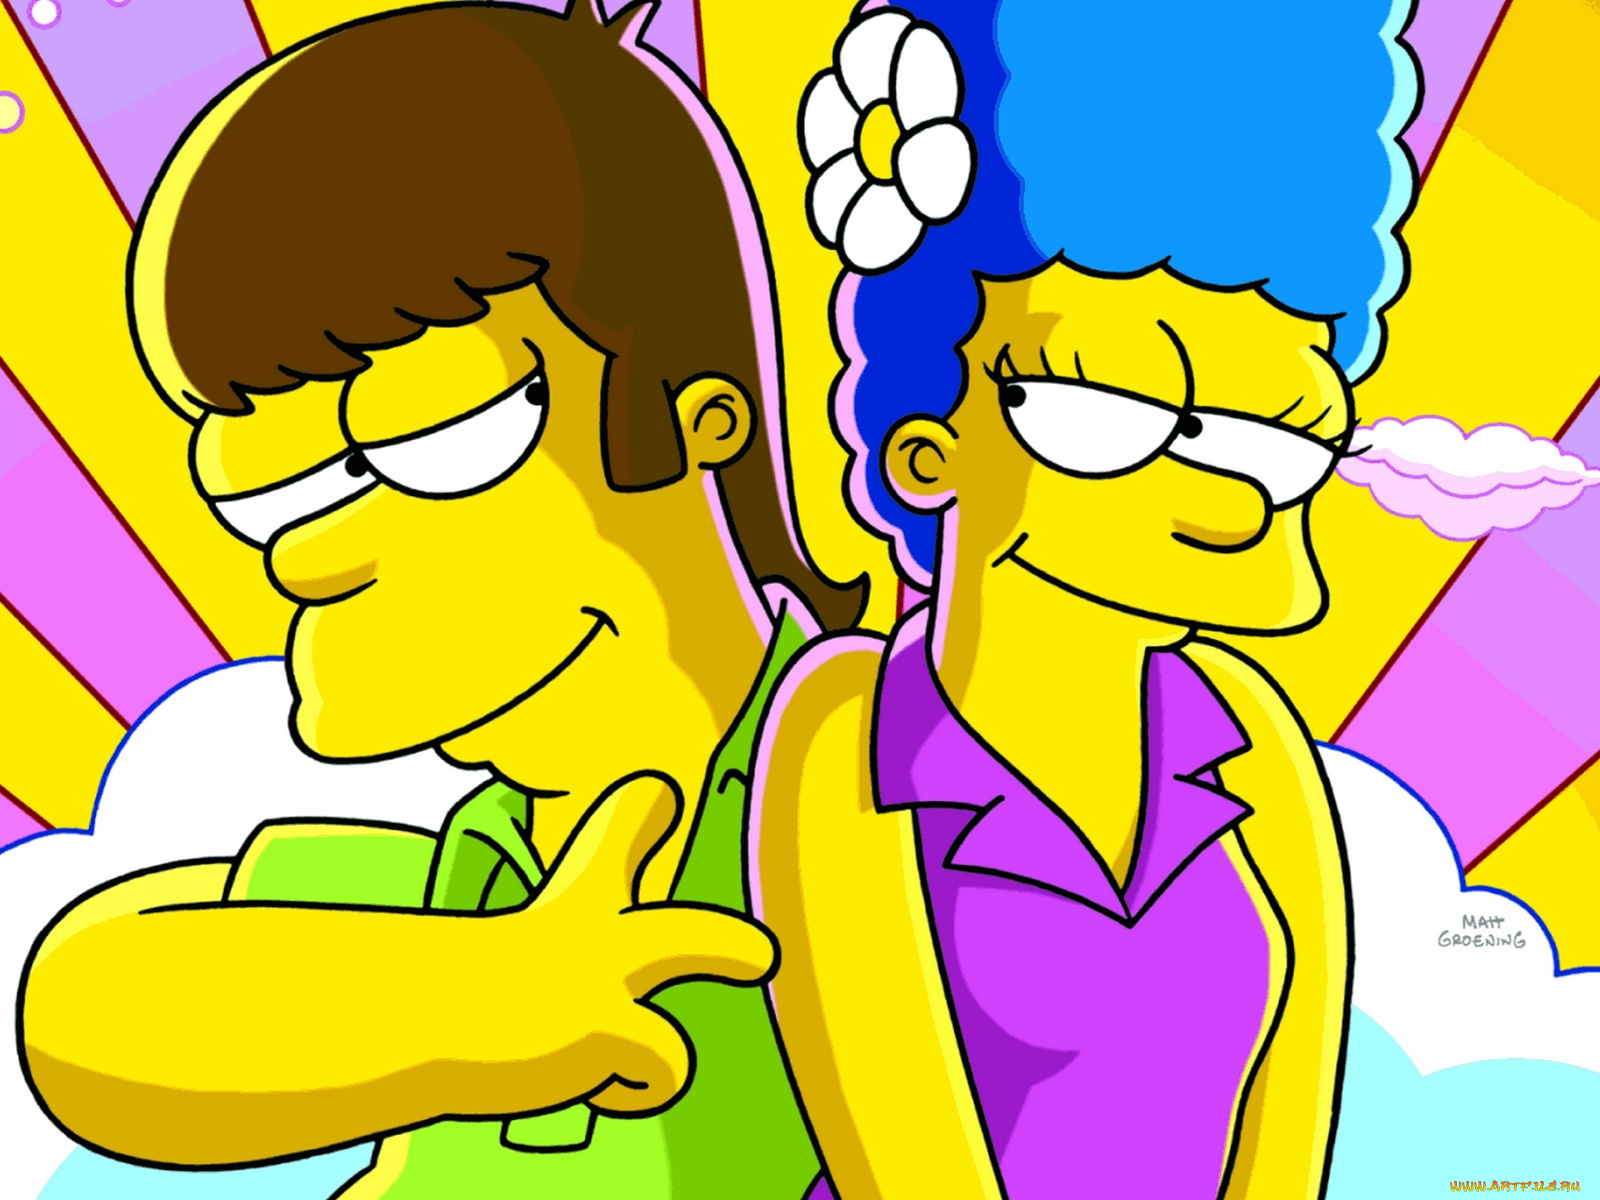 The Simpsons Smithers To Finally Come Out As Gay, Producer Reveals